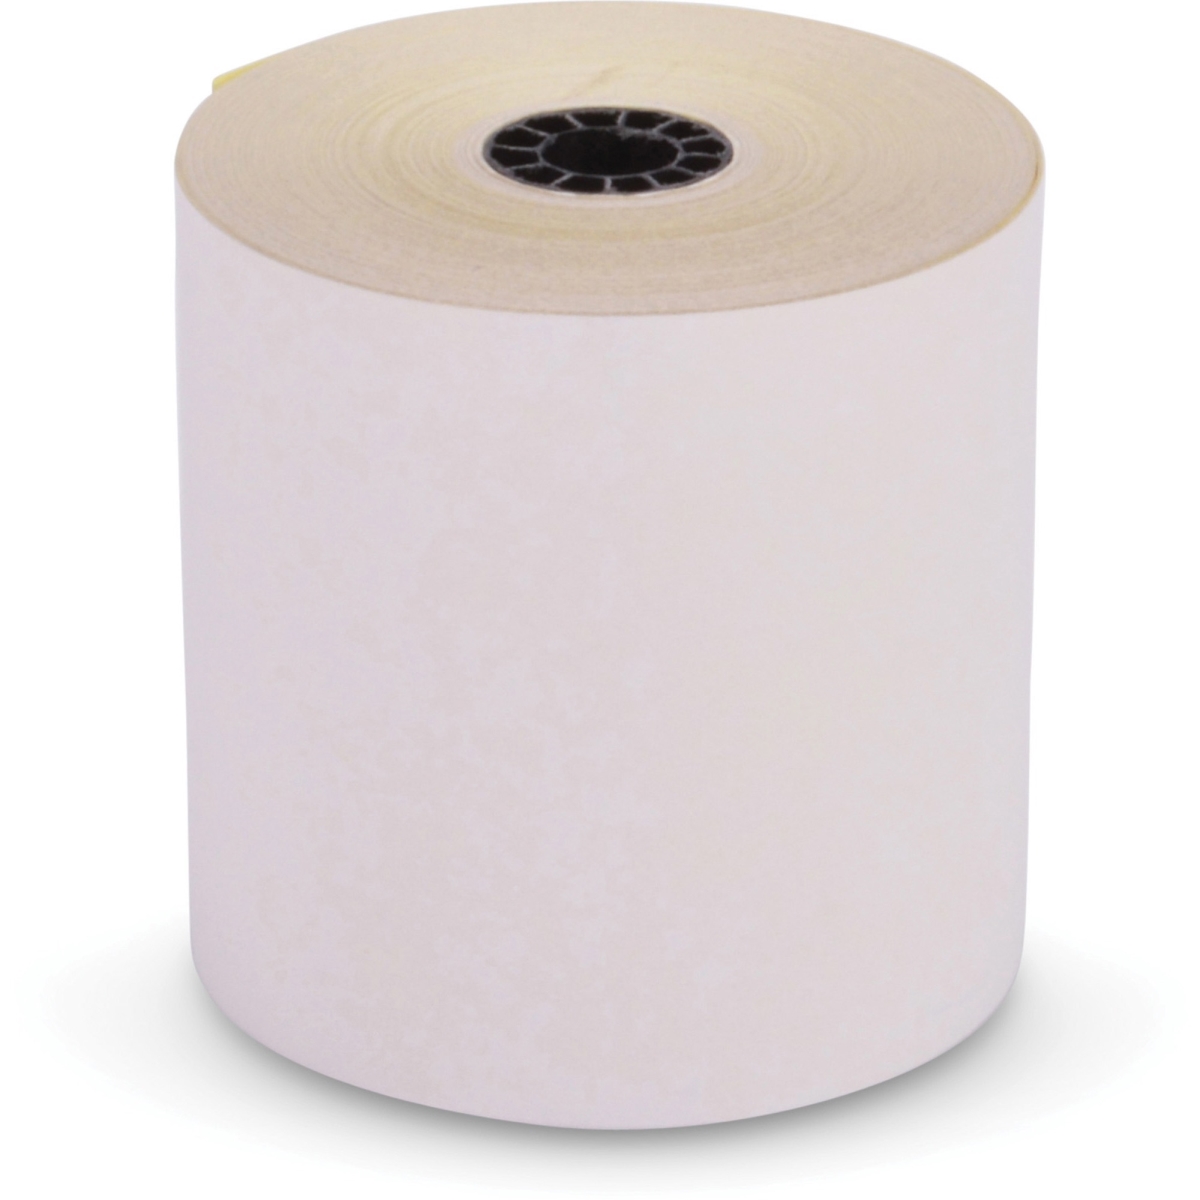 Iconex Icx90771000 3 In. X 90 Ft. Carbonless Pos Paper Roll, White & Yellow